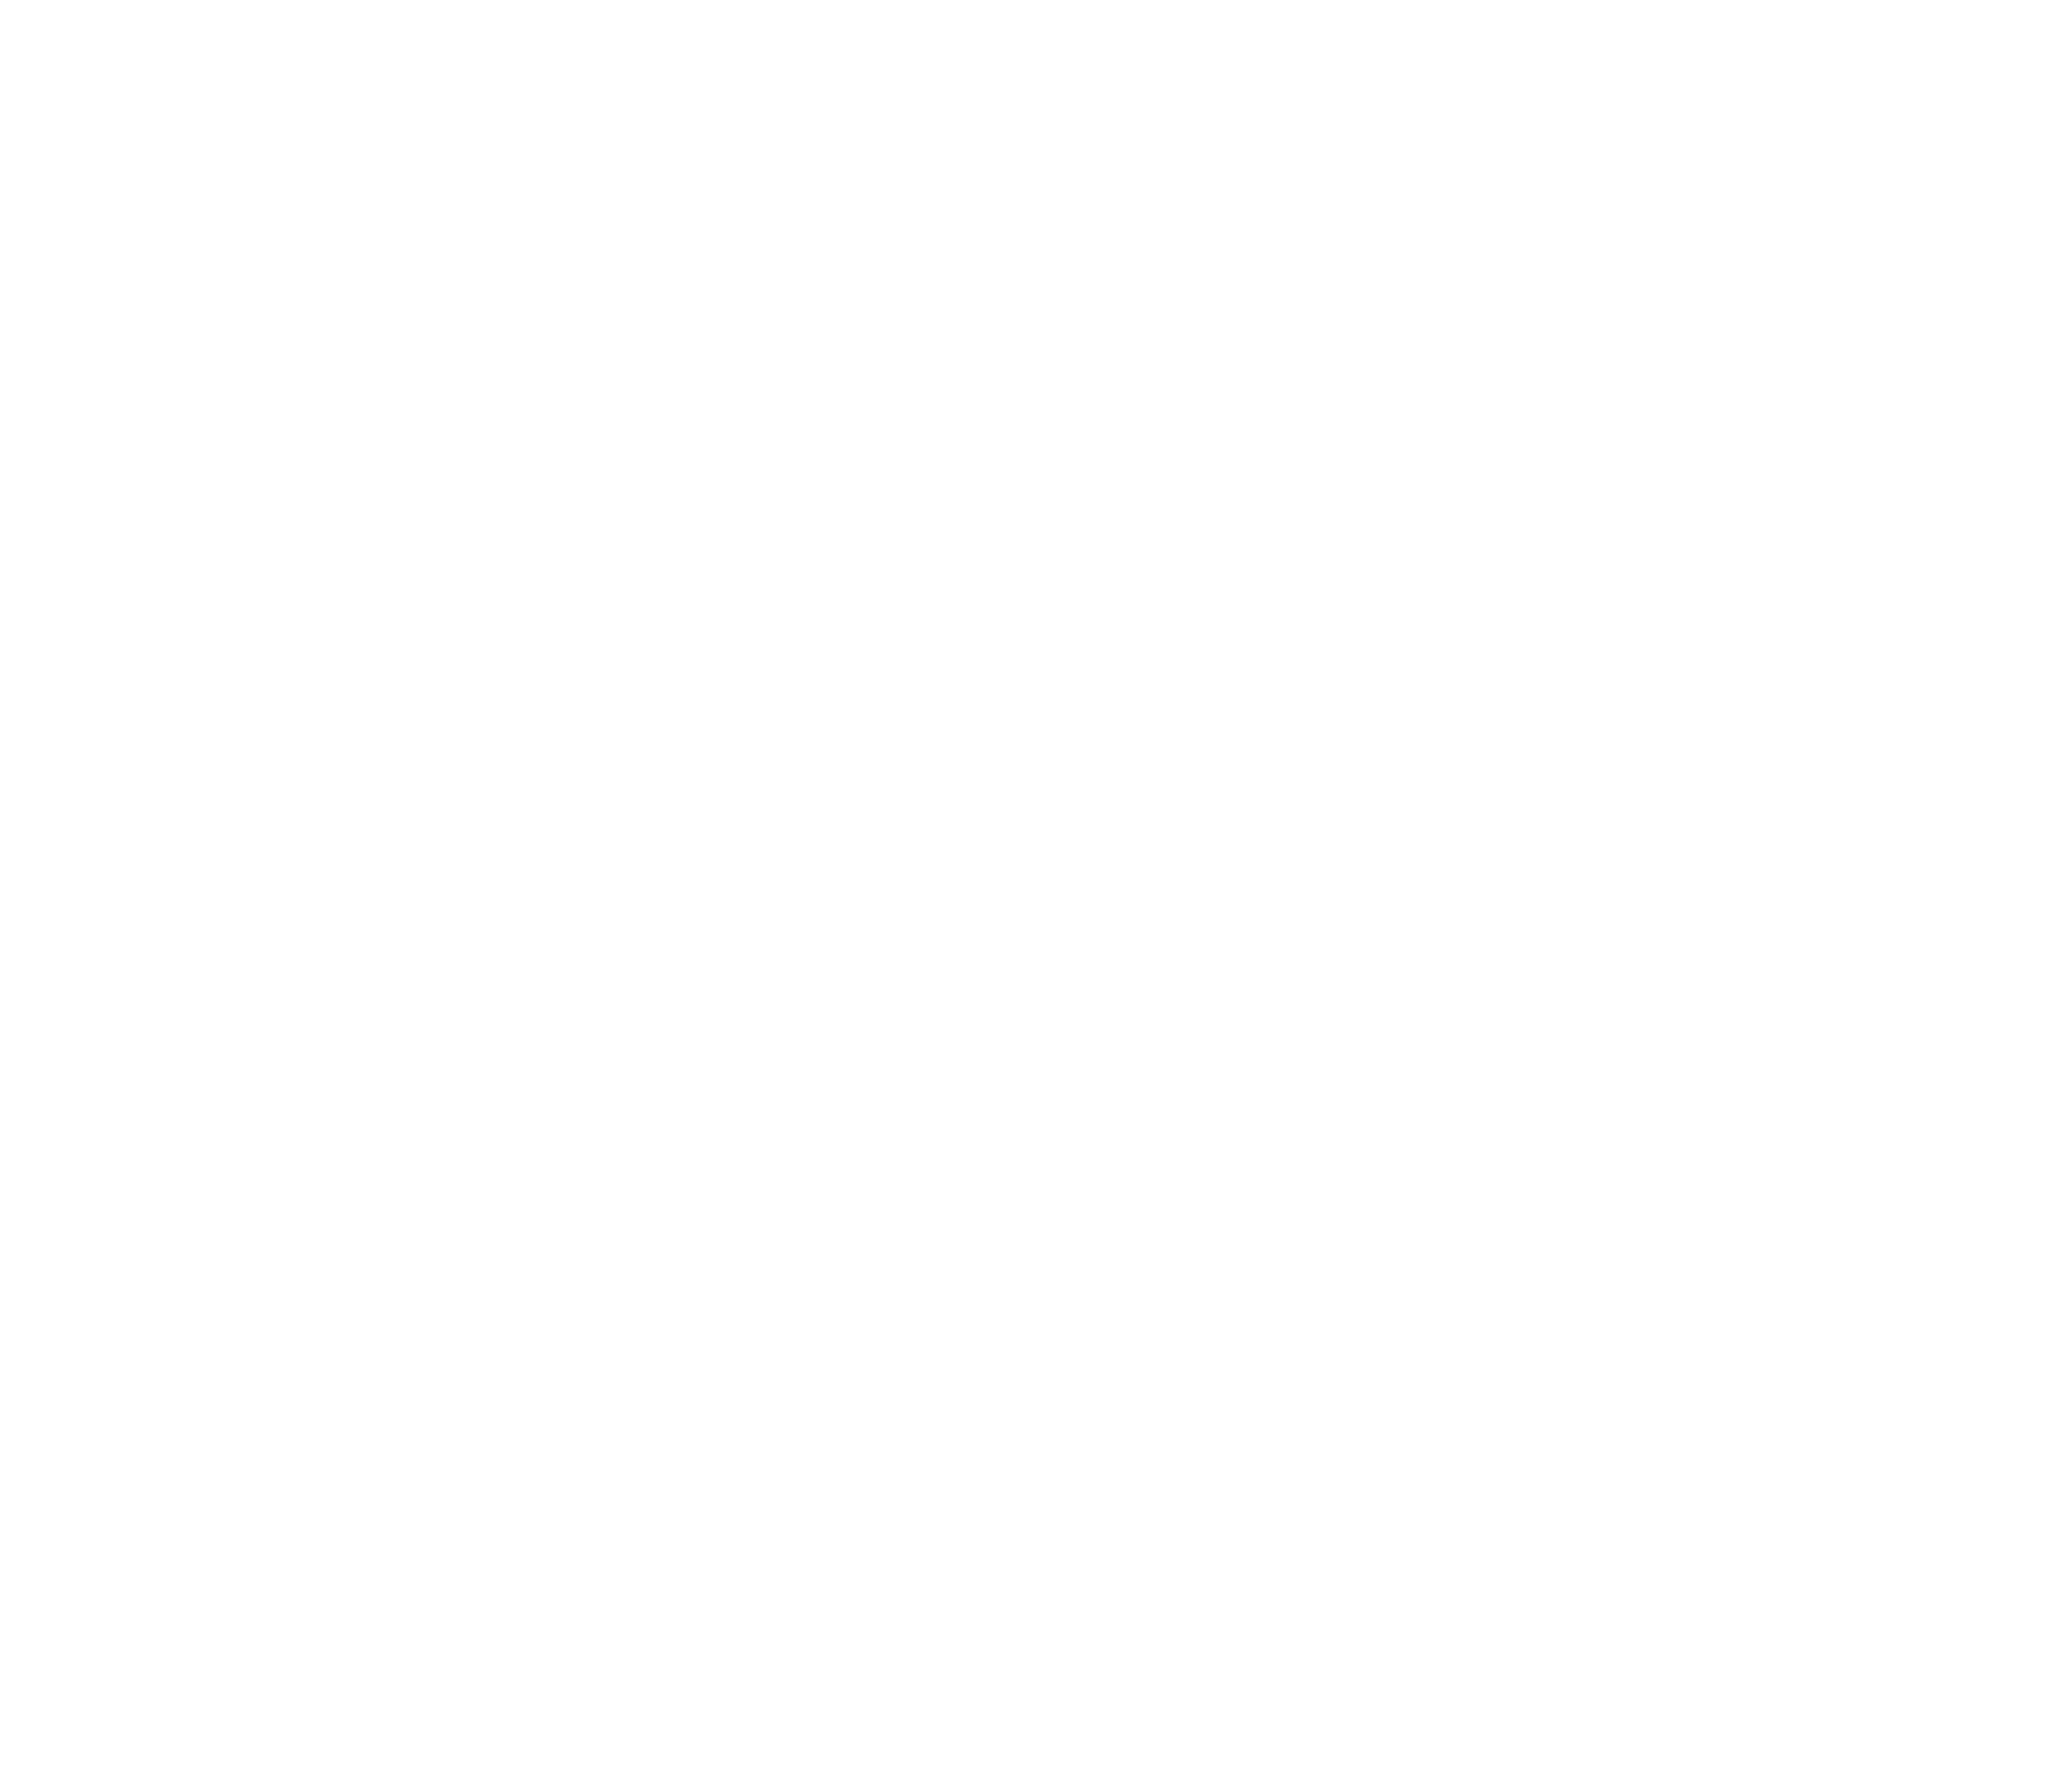 http://www.reslogproject.org/wp-content/uploads/2022/08/res1-01-01-01.png